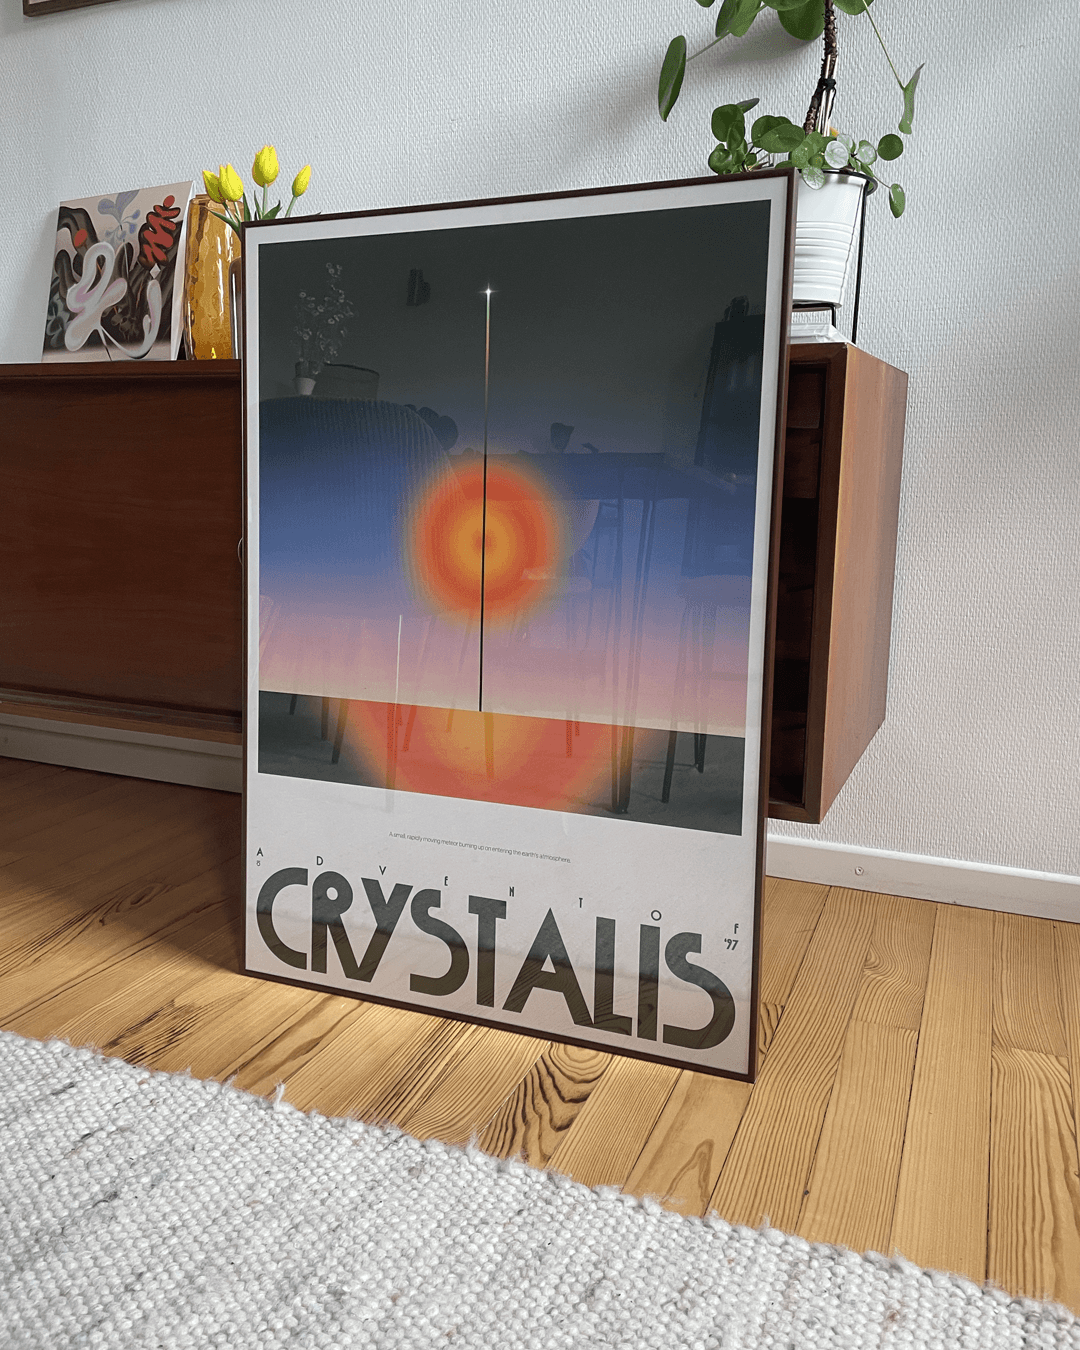 A framed poster of crystalis with the a centered meteor